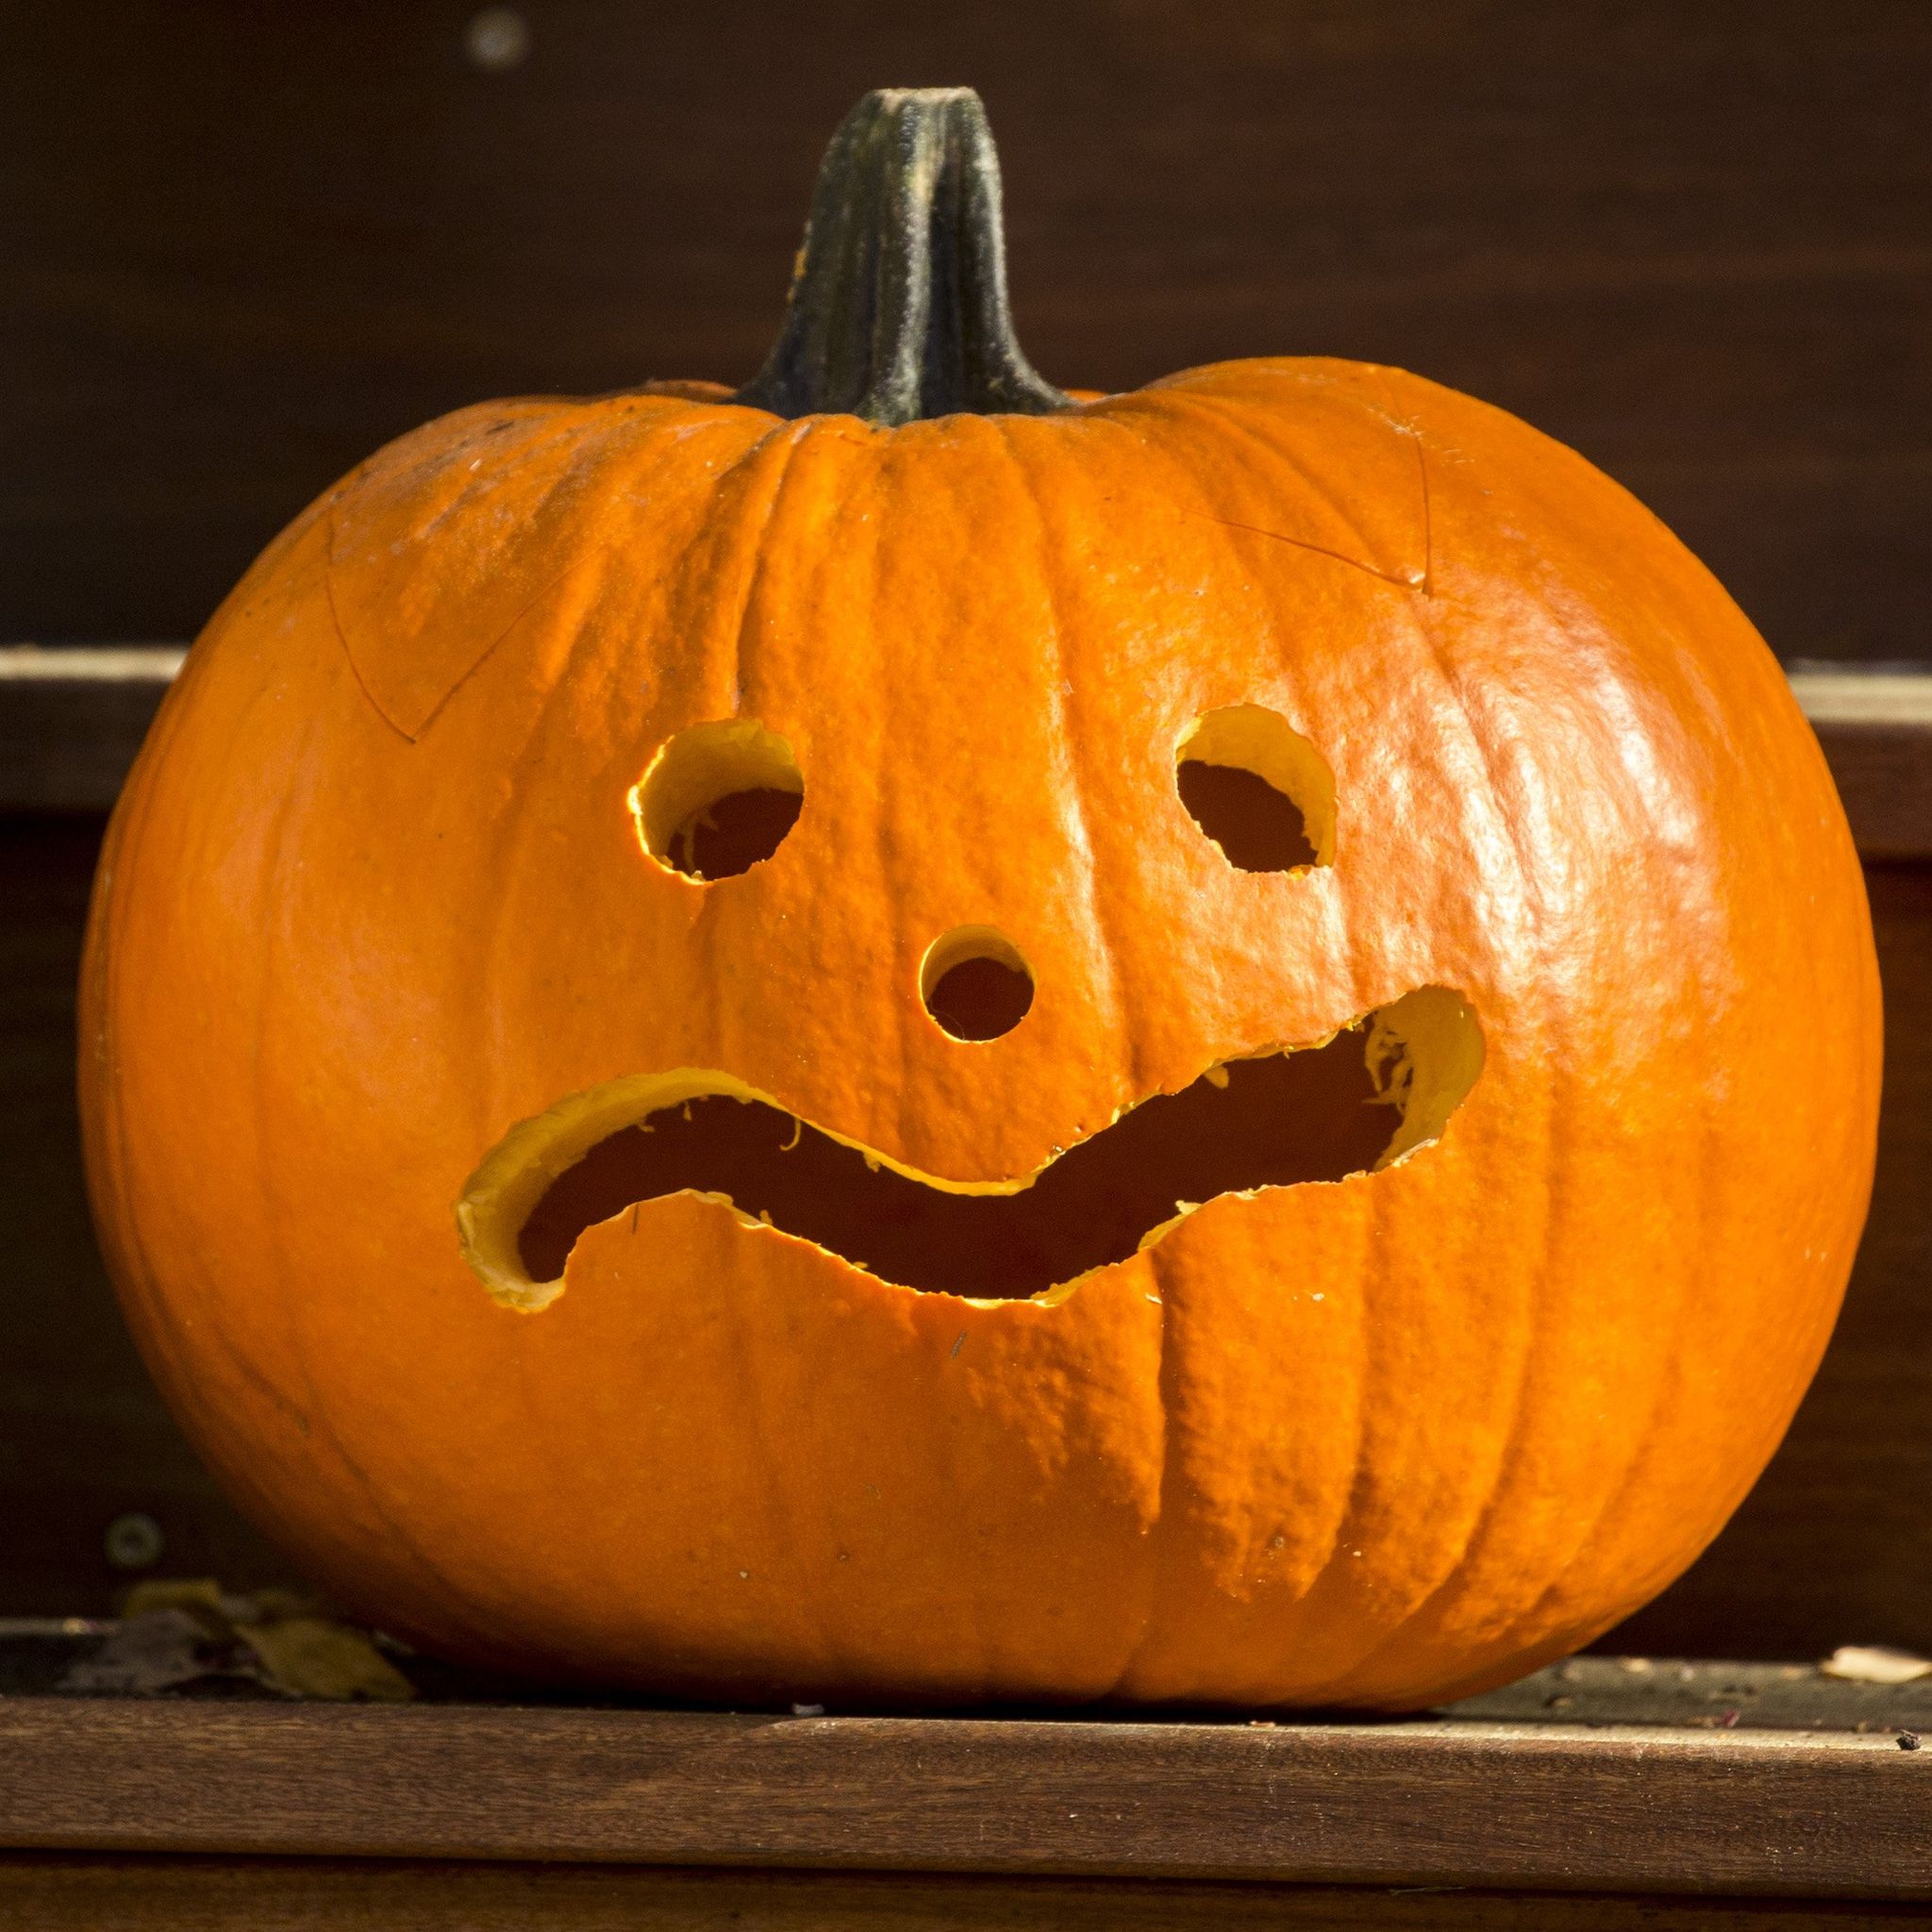 Creative jack-o’-lanterns are a real treat | The Seattle Times